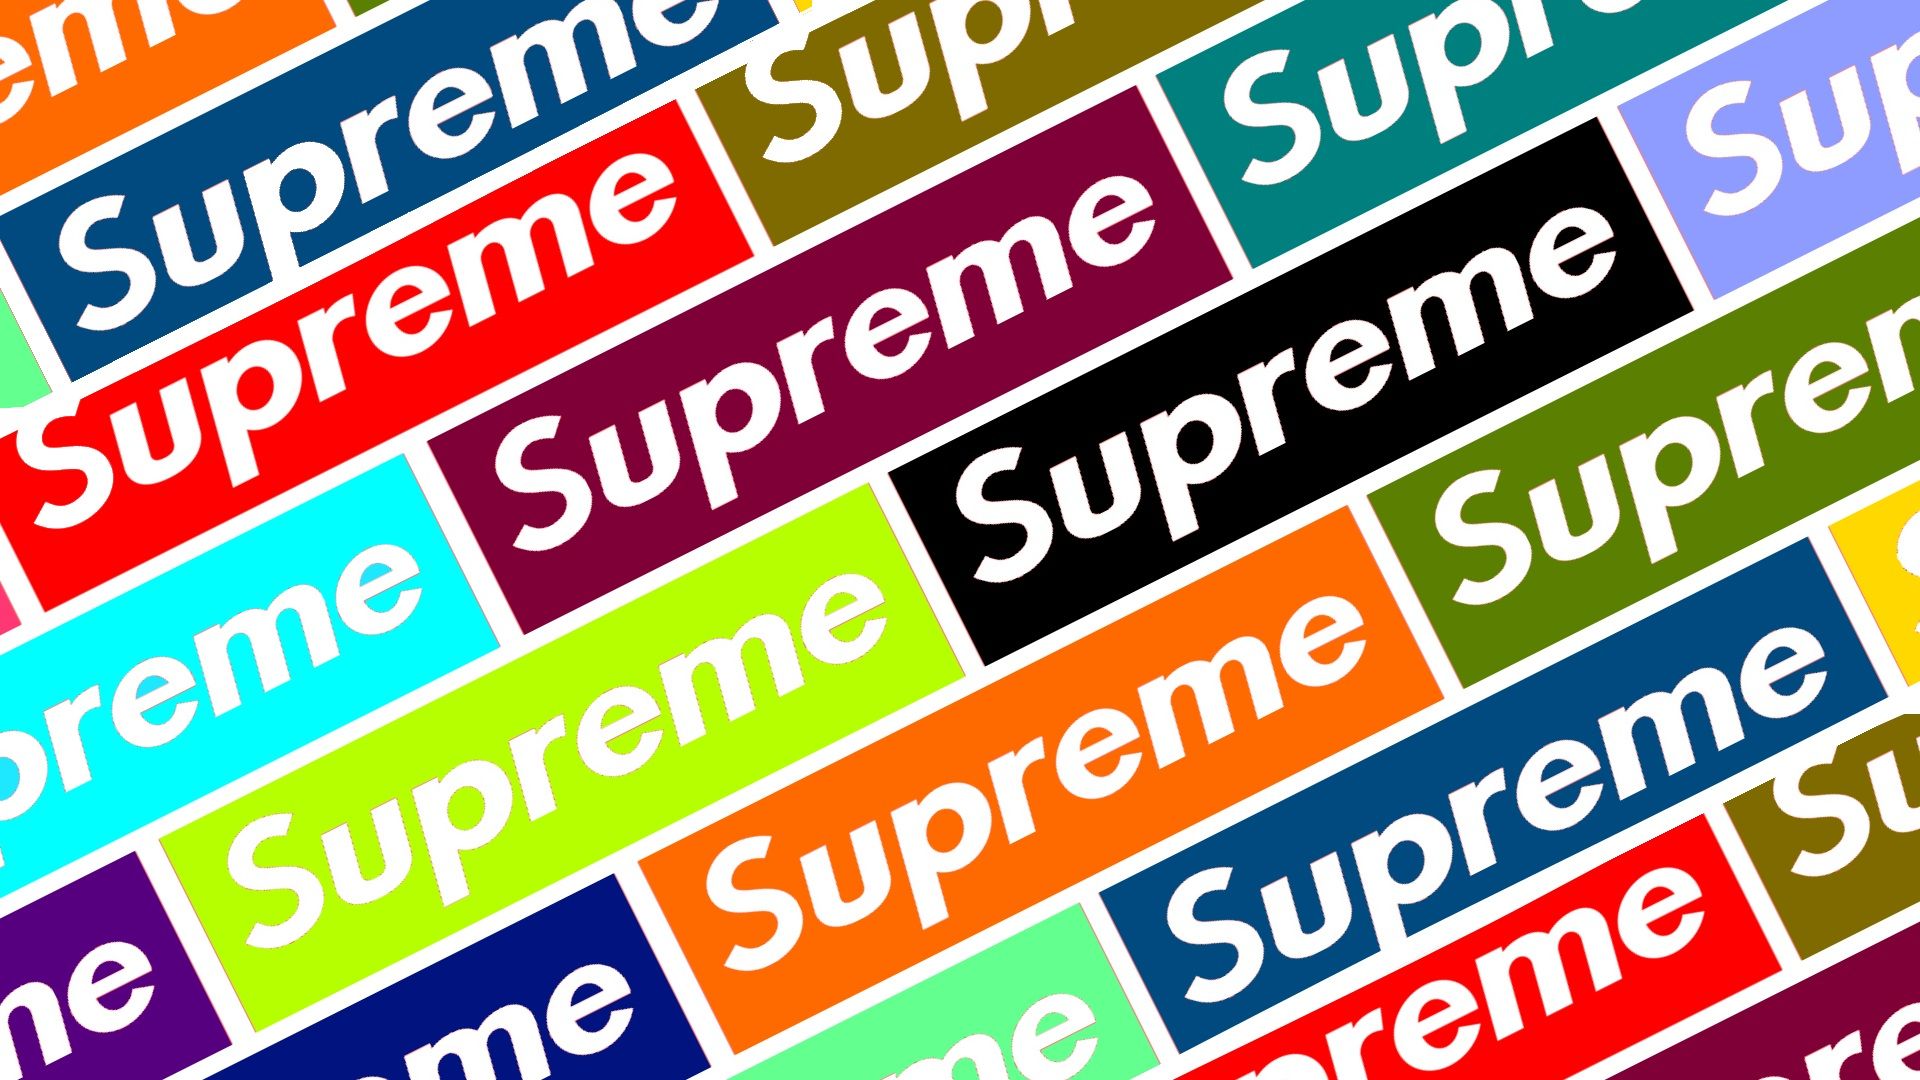 Supreme Full HD Wallpaper Free Download for Desktop PC Best Wallpaper Full HD Free Download